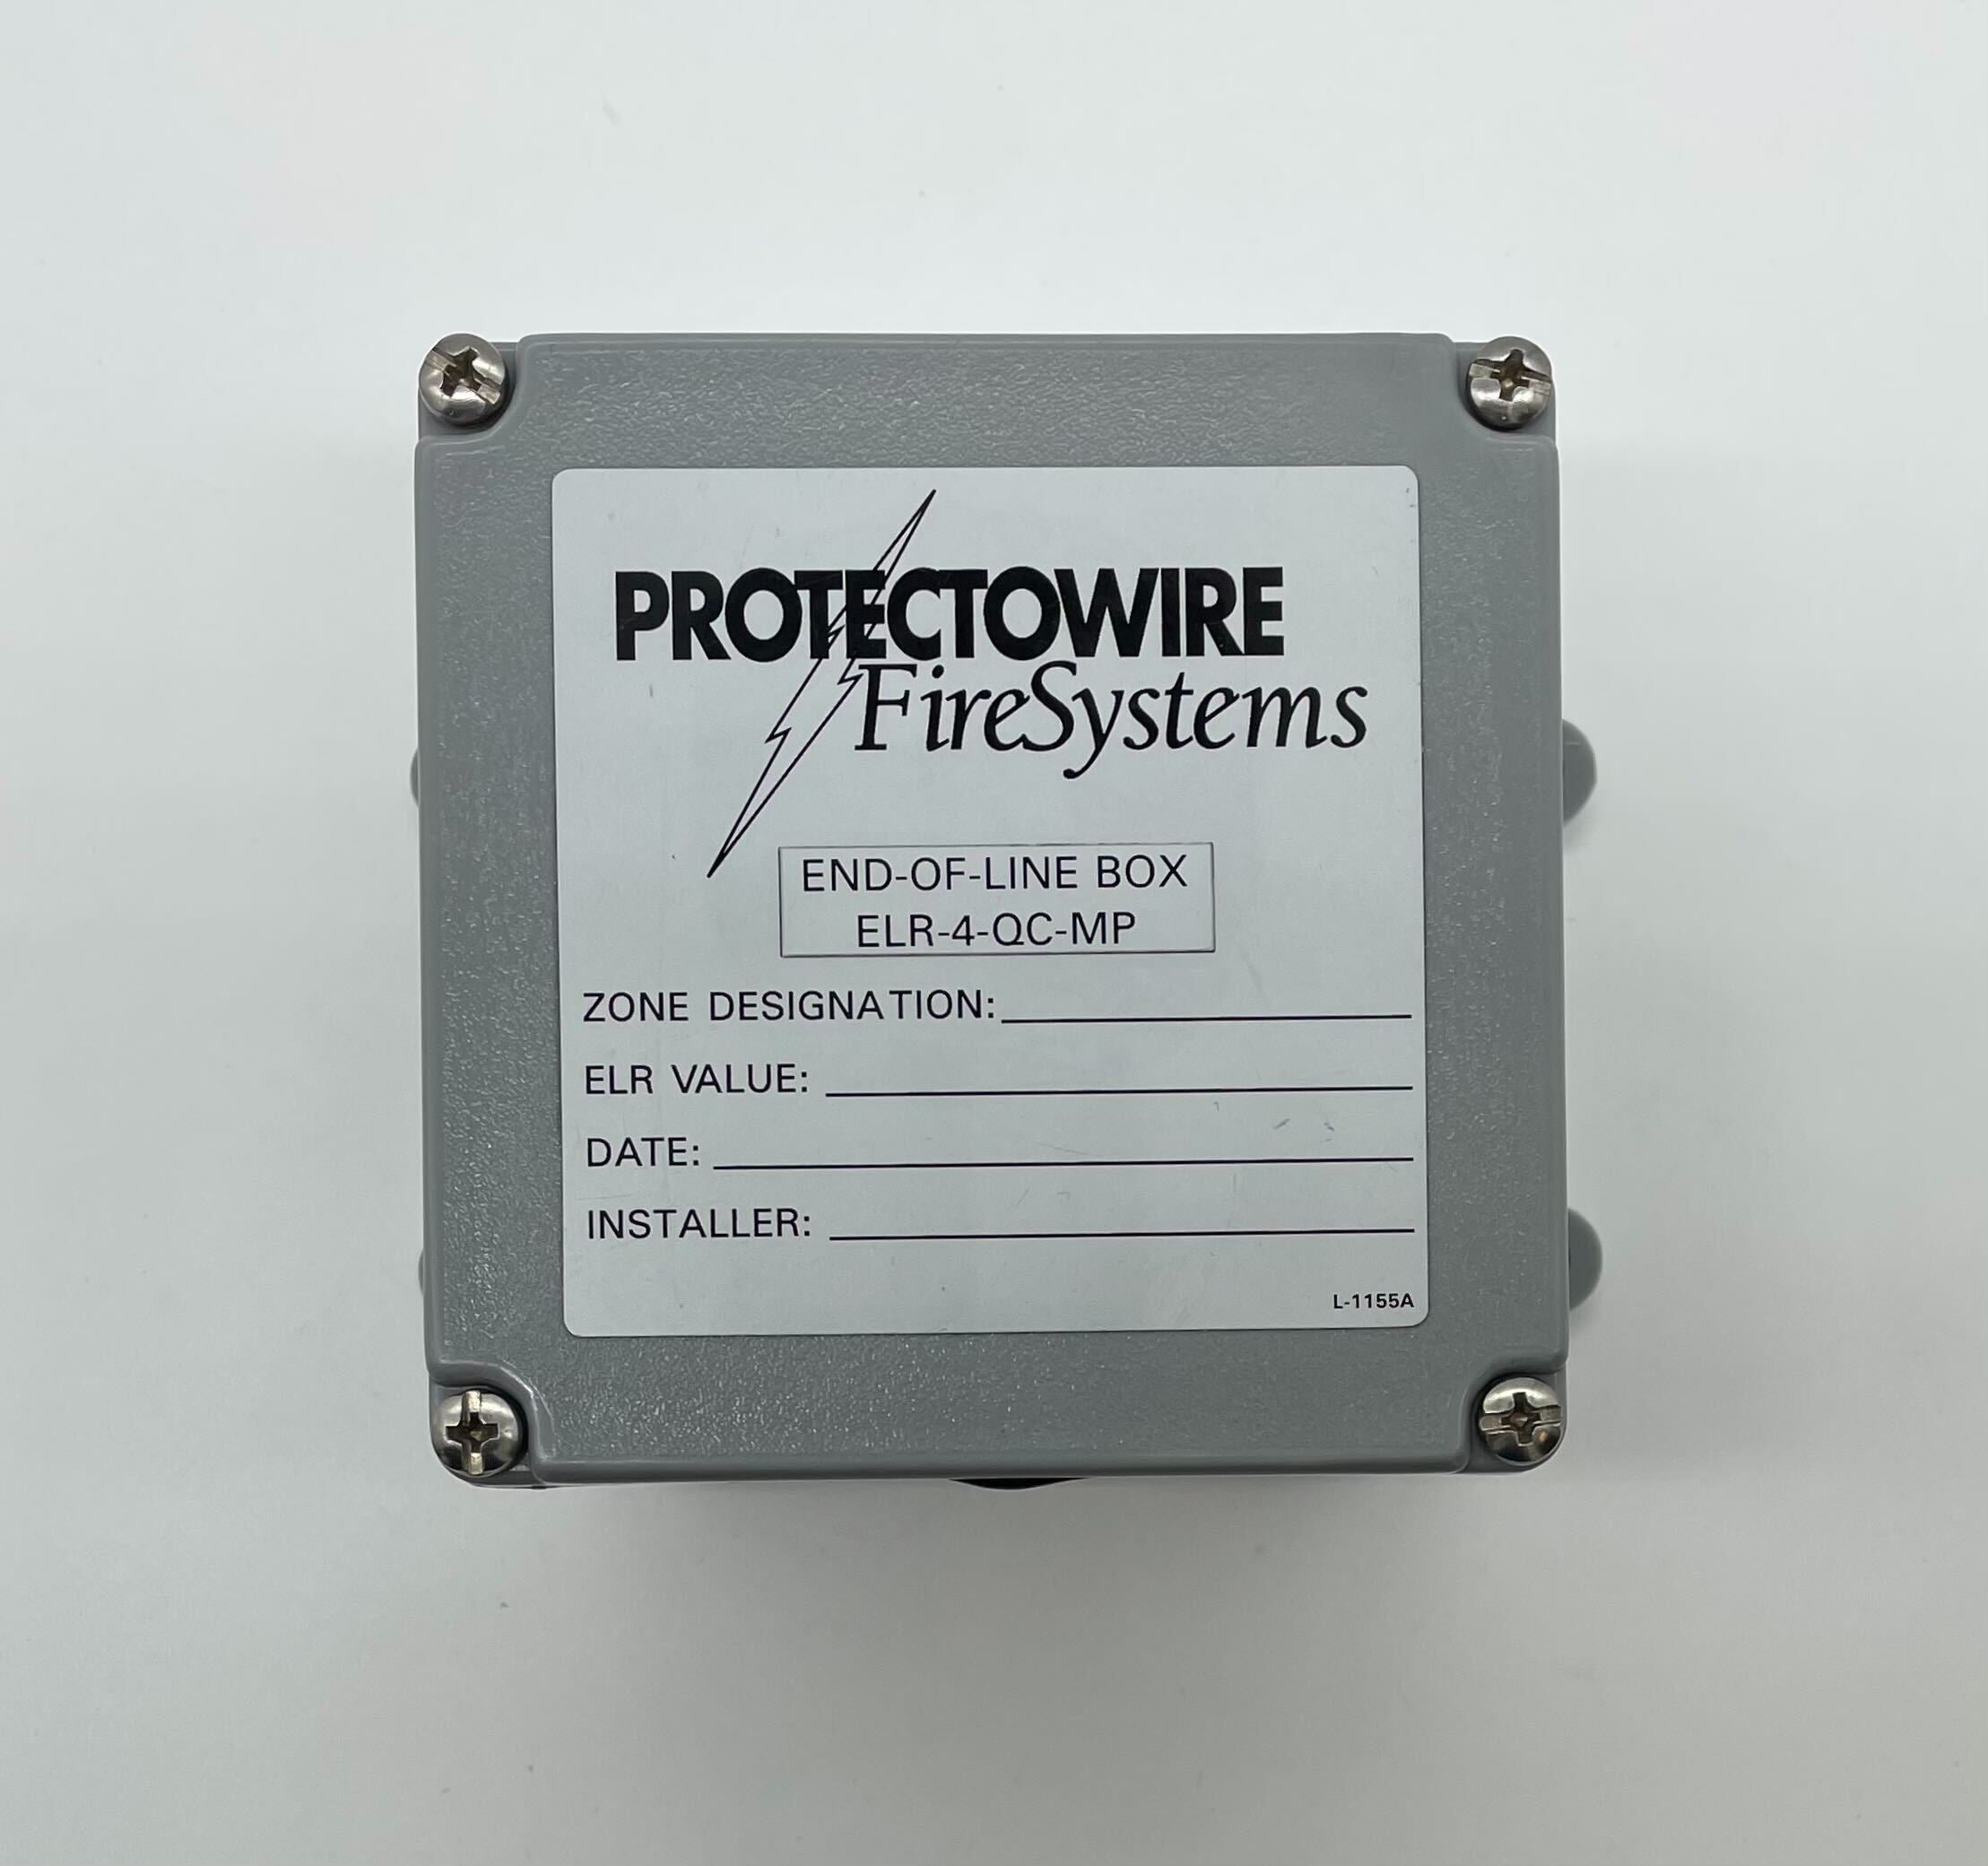 Protectowire ELR-4-QC-MP